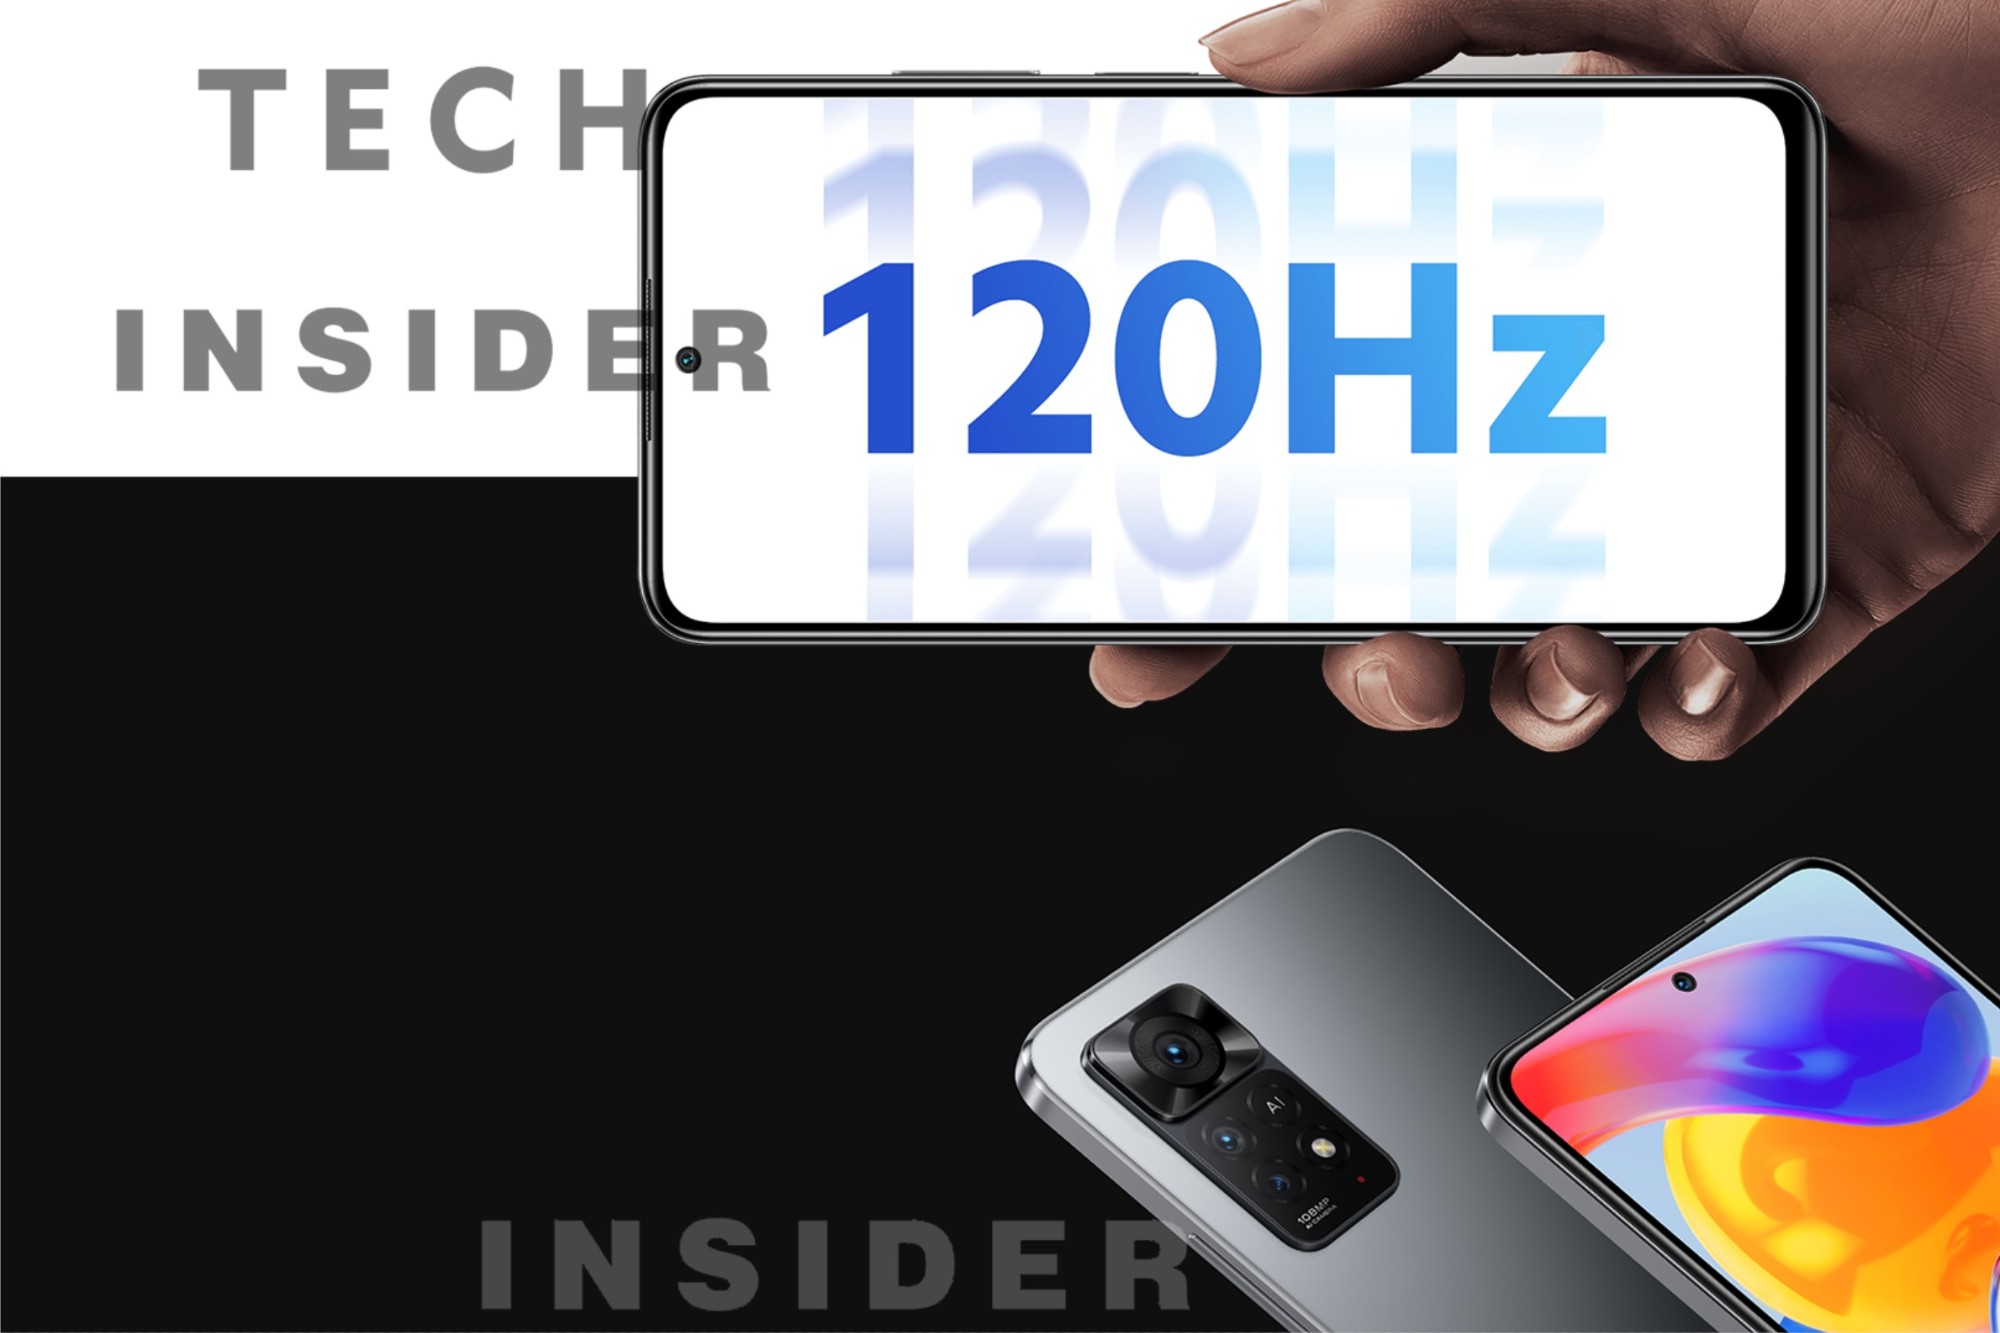 Leaked promotional image showing the 120Hz refresh rate feature of the Redmi Note 11 Pro.